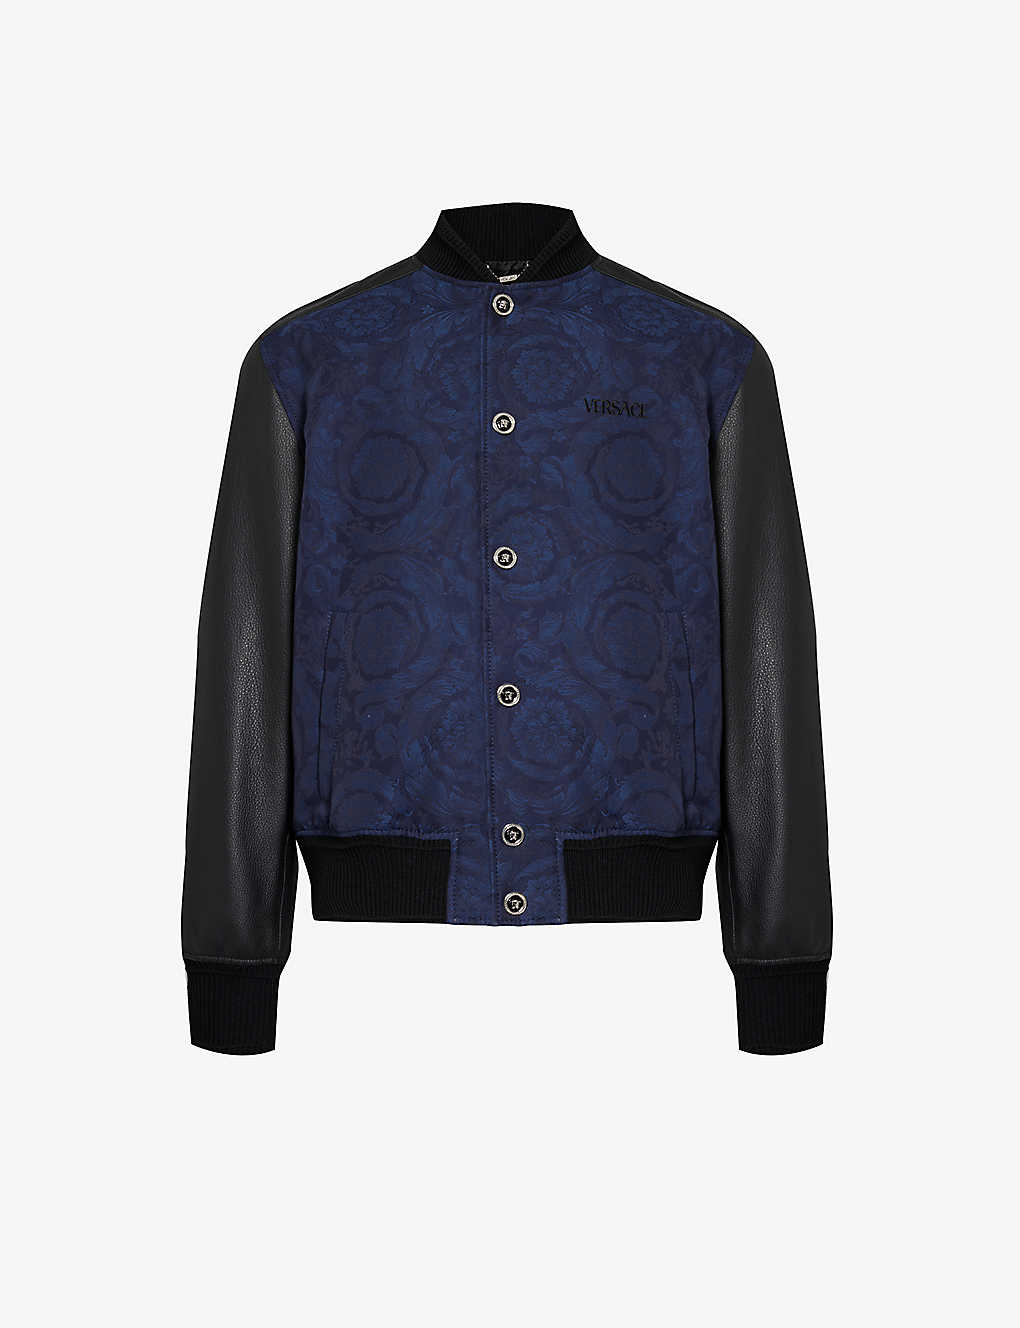 Versace Mens Navy Blue Baroque-pattern Stand-collar Cotton Bomber Jacket